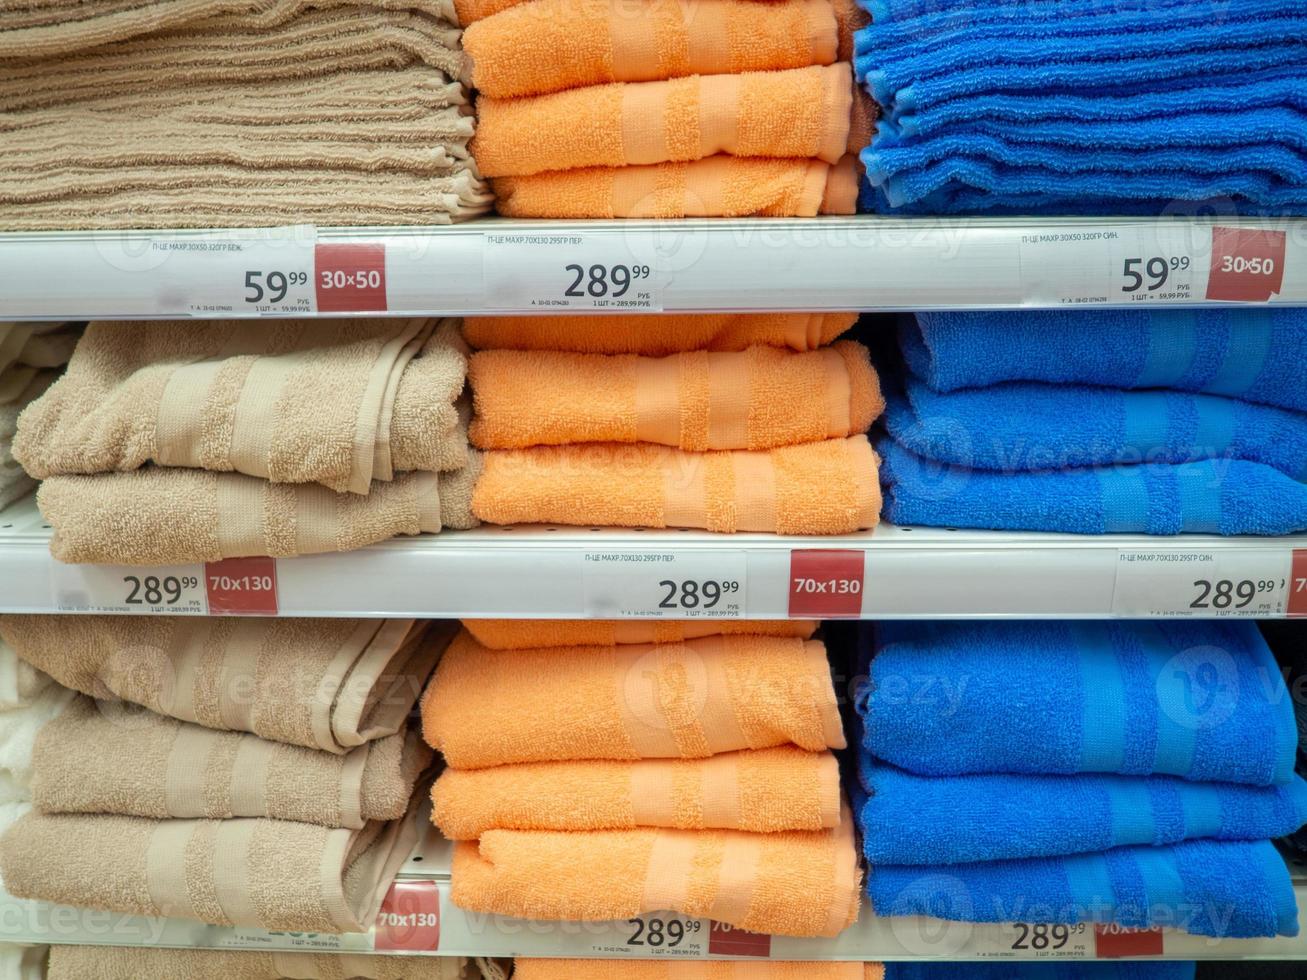 Shelves in the store. Laying out goods in a supermarket. Sale of towels. photo